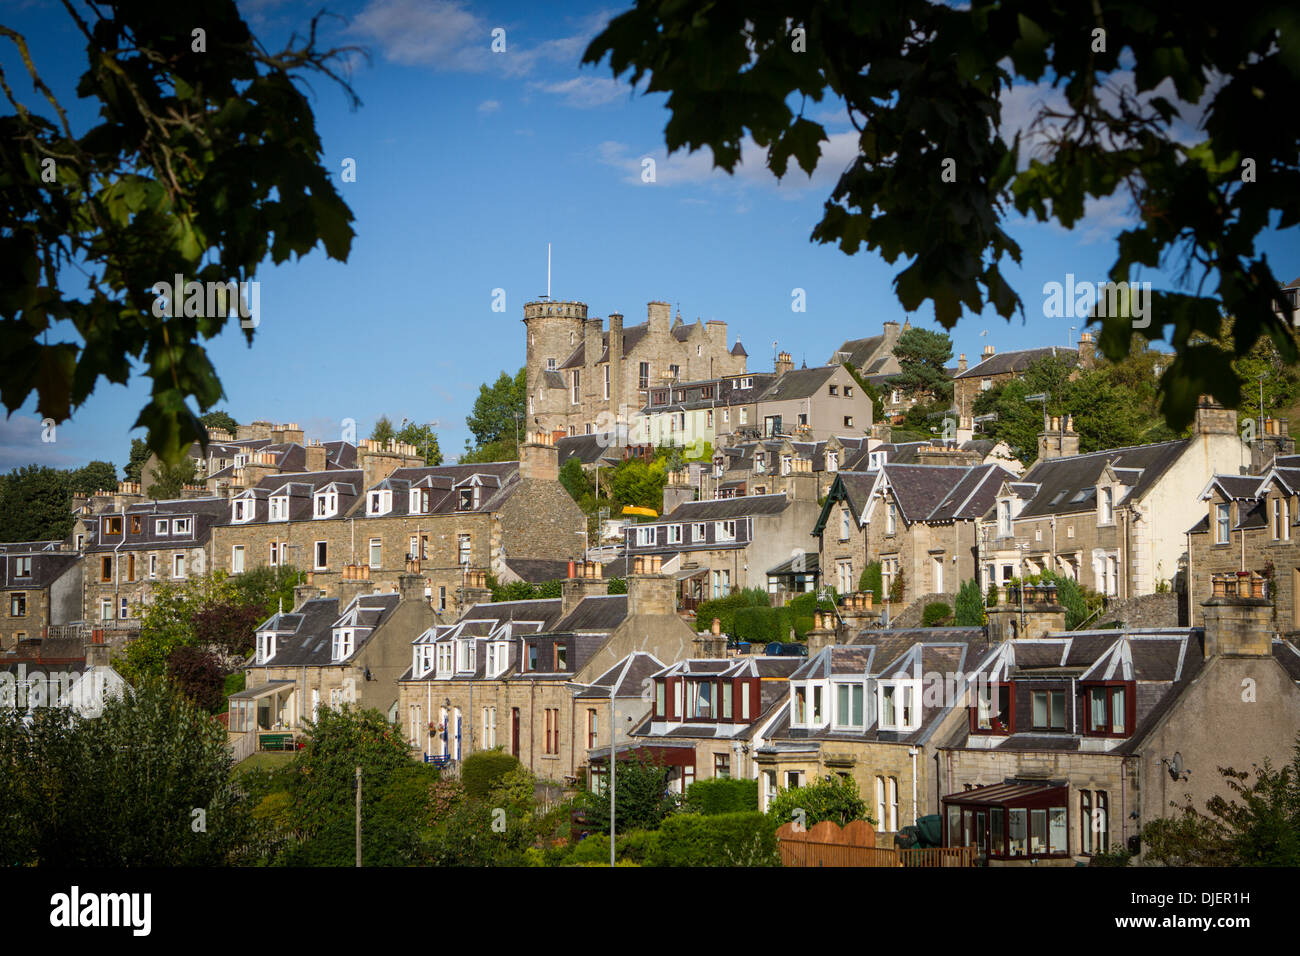 The Scottish Border Town of Selkirk Stock Photo